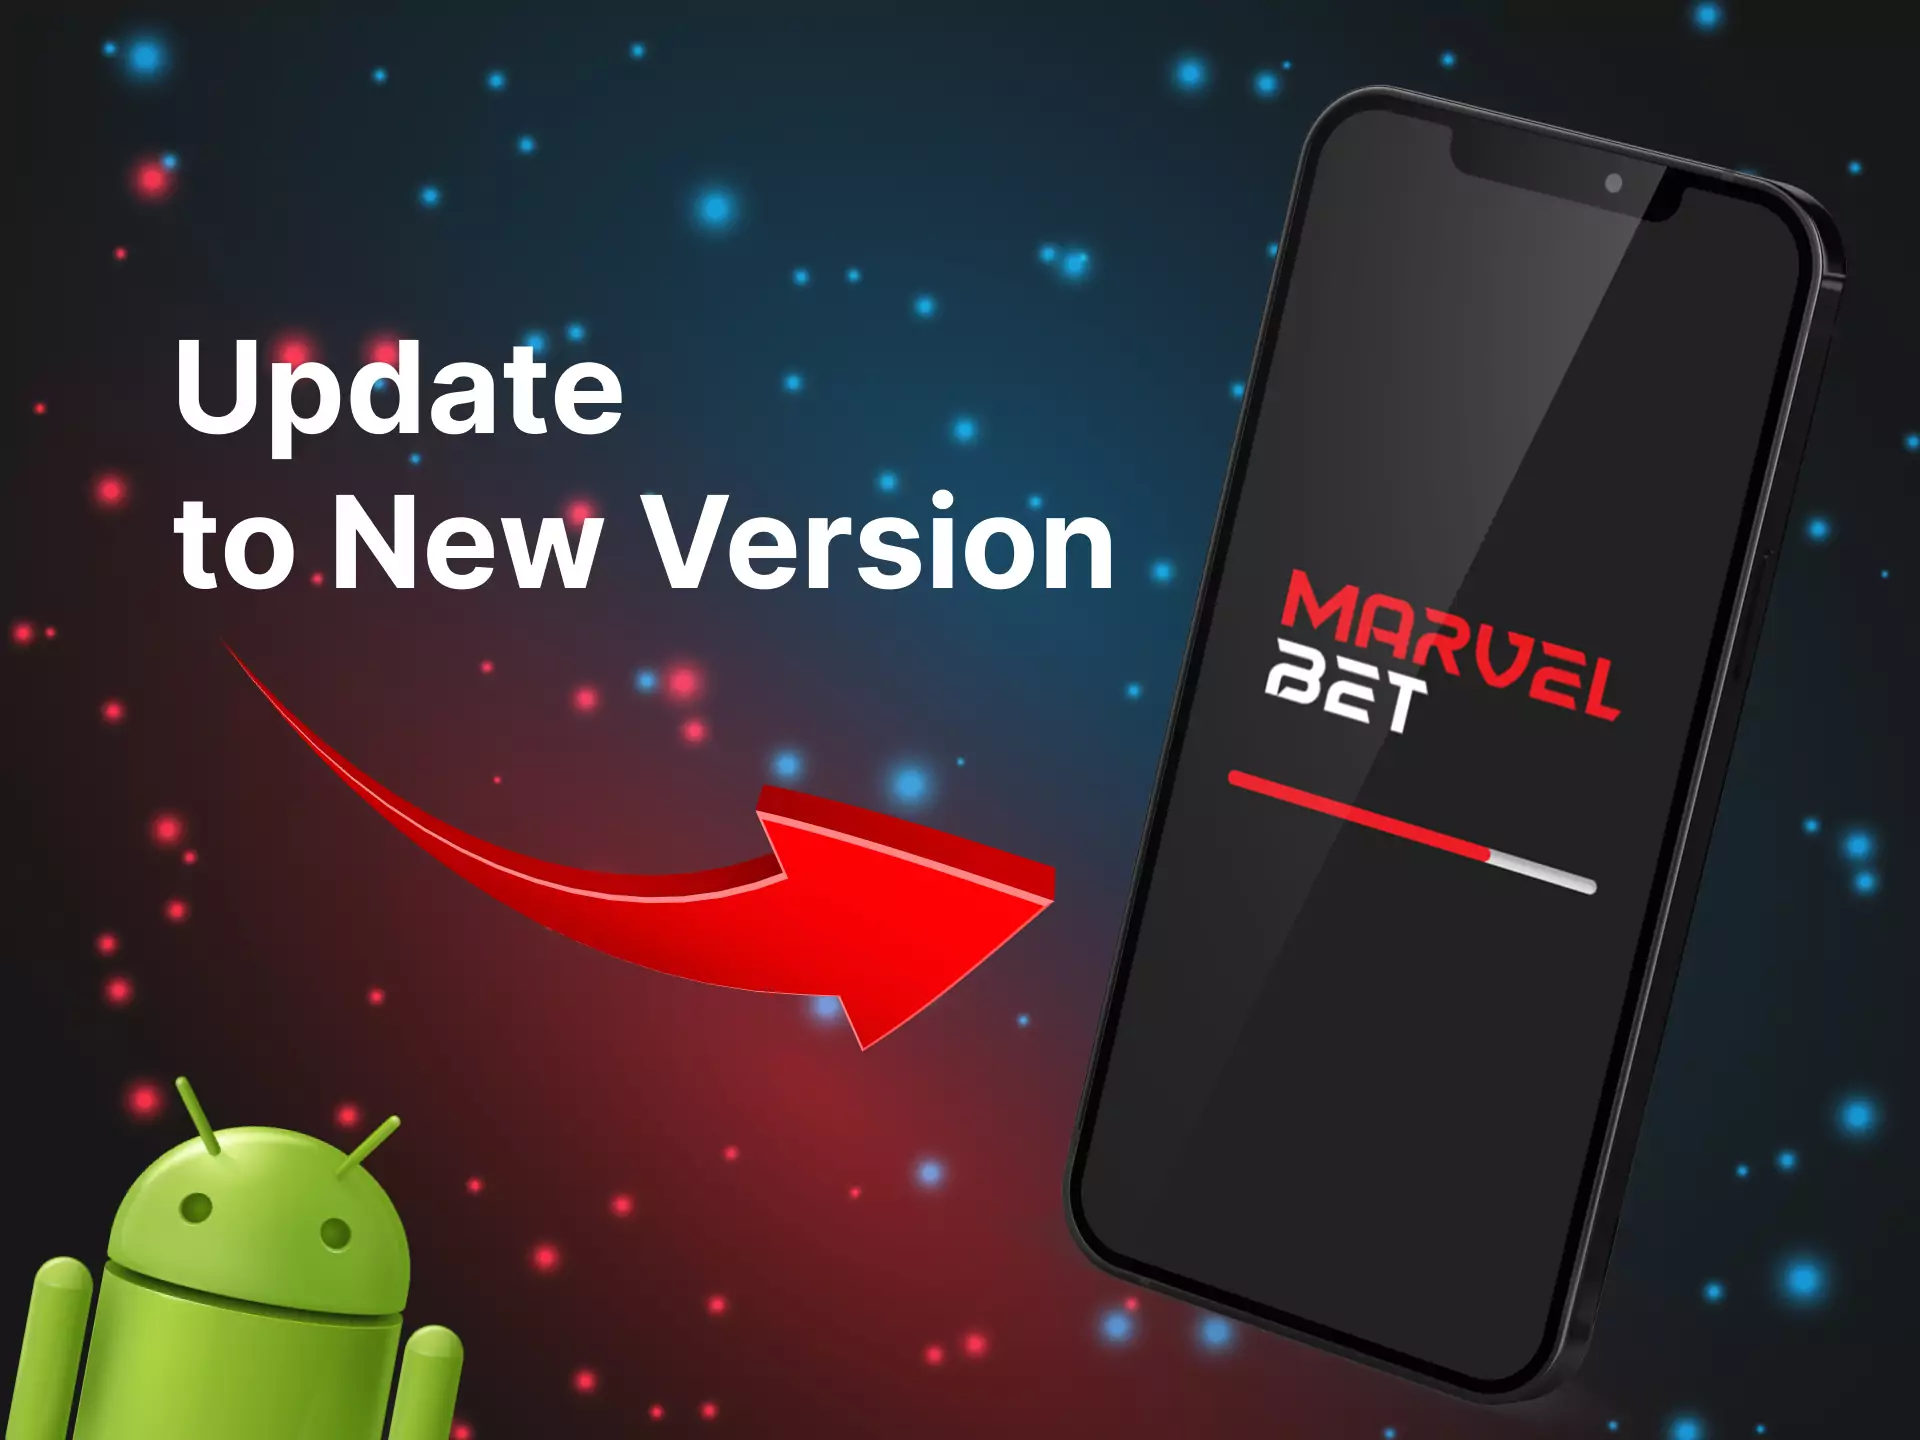 After a new version will be released, update the Marvelbet app to get new features.